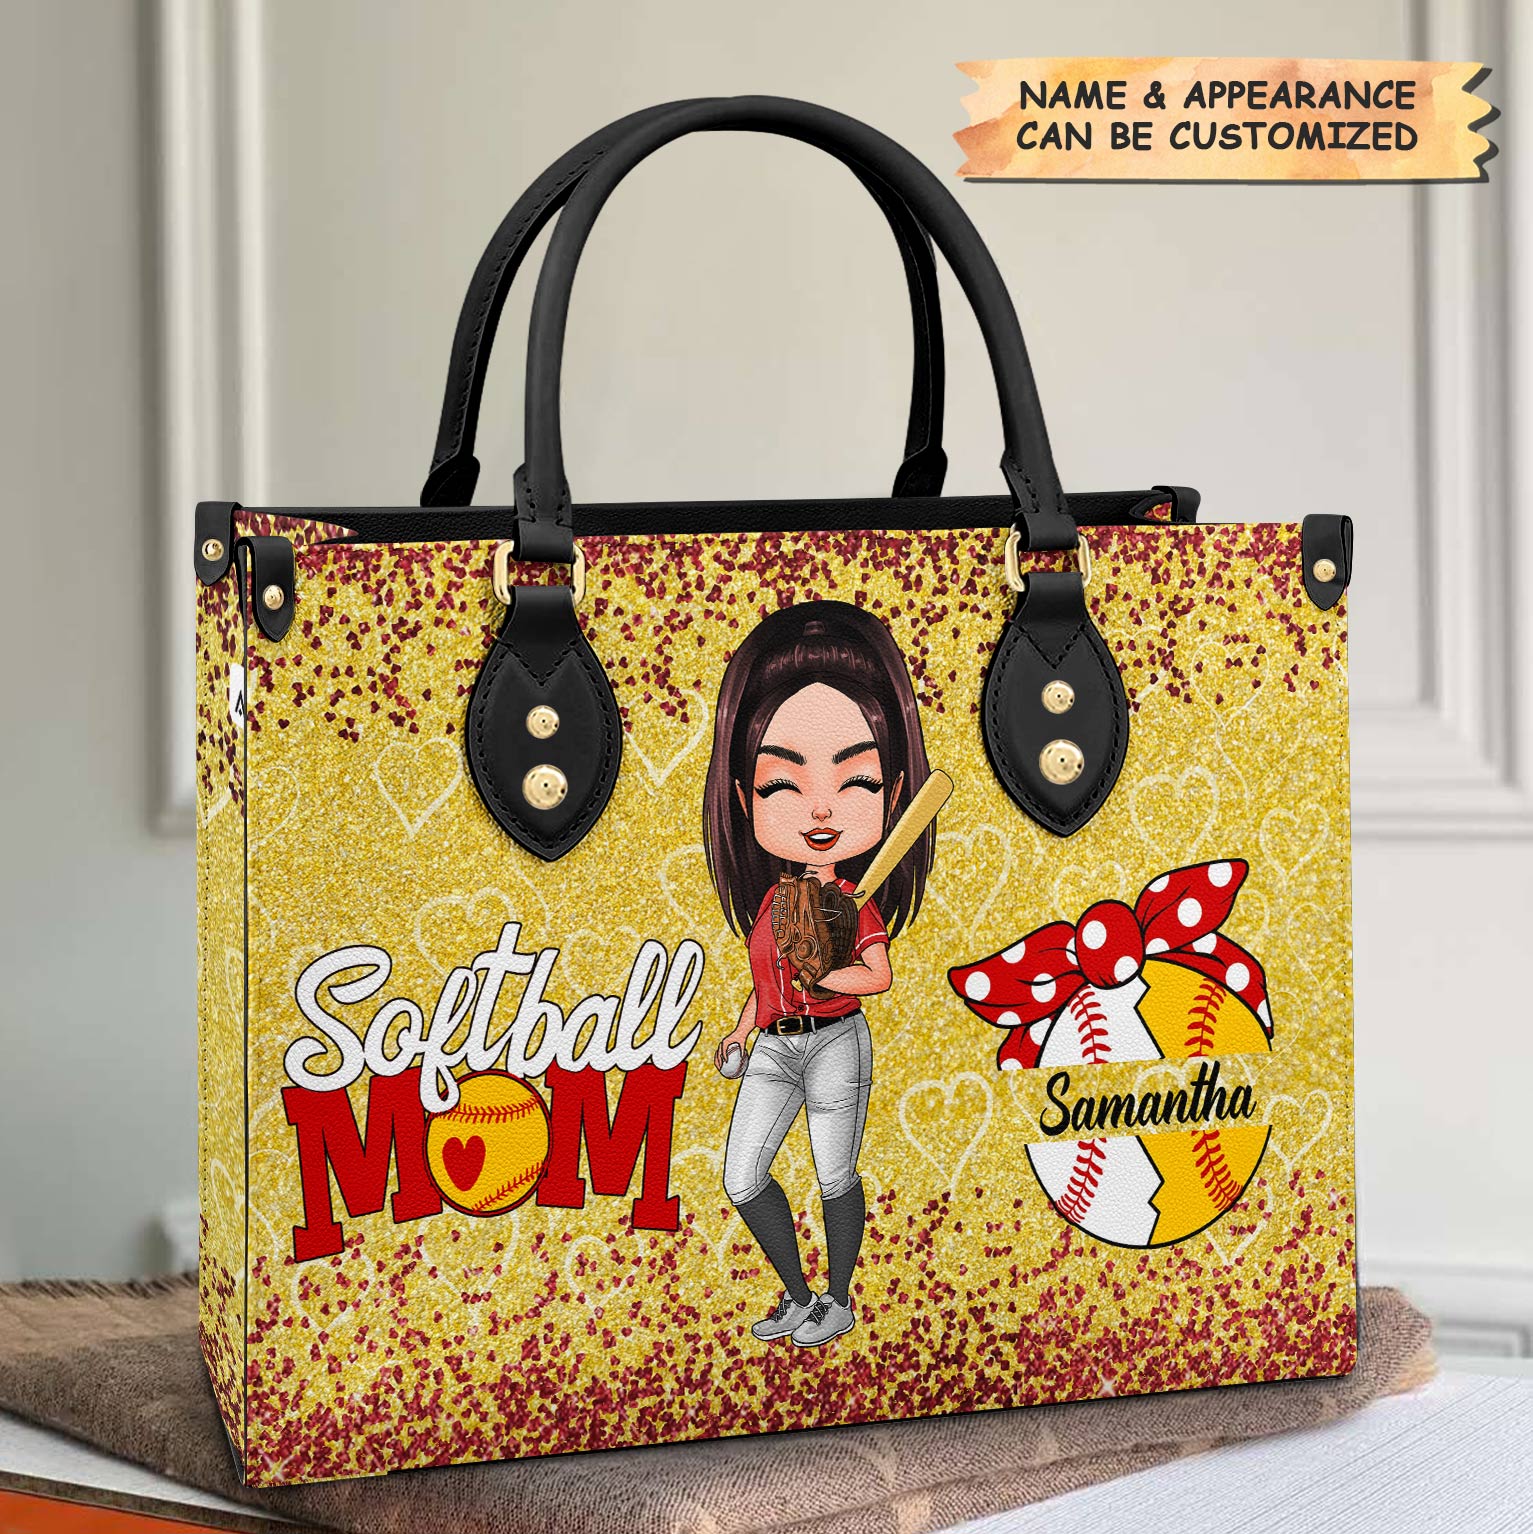 Personalized Leather Bag - Gift For Softball Lovers - Softball Mom